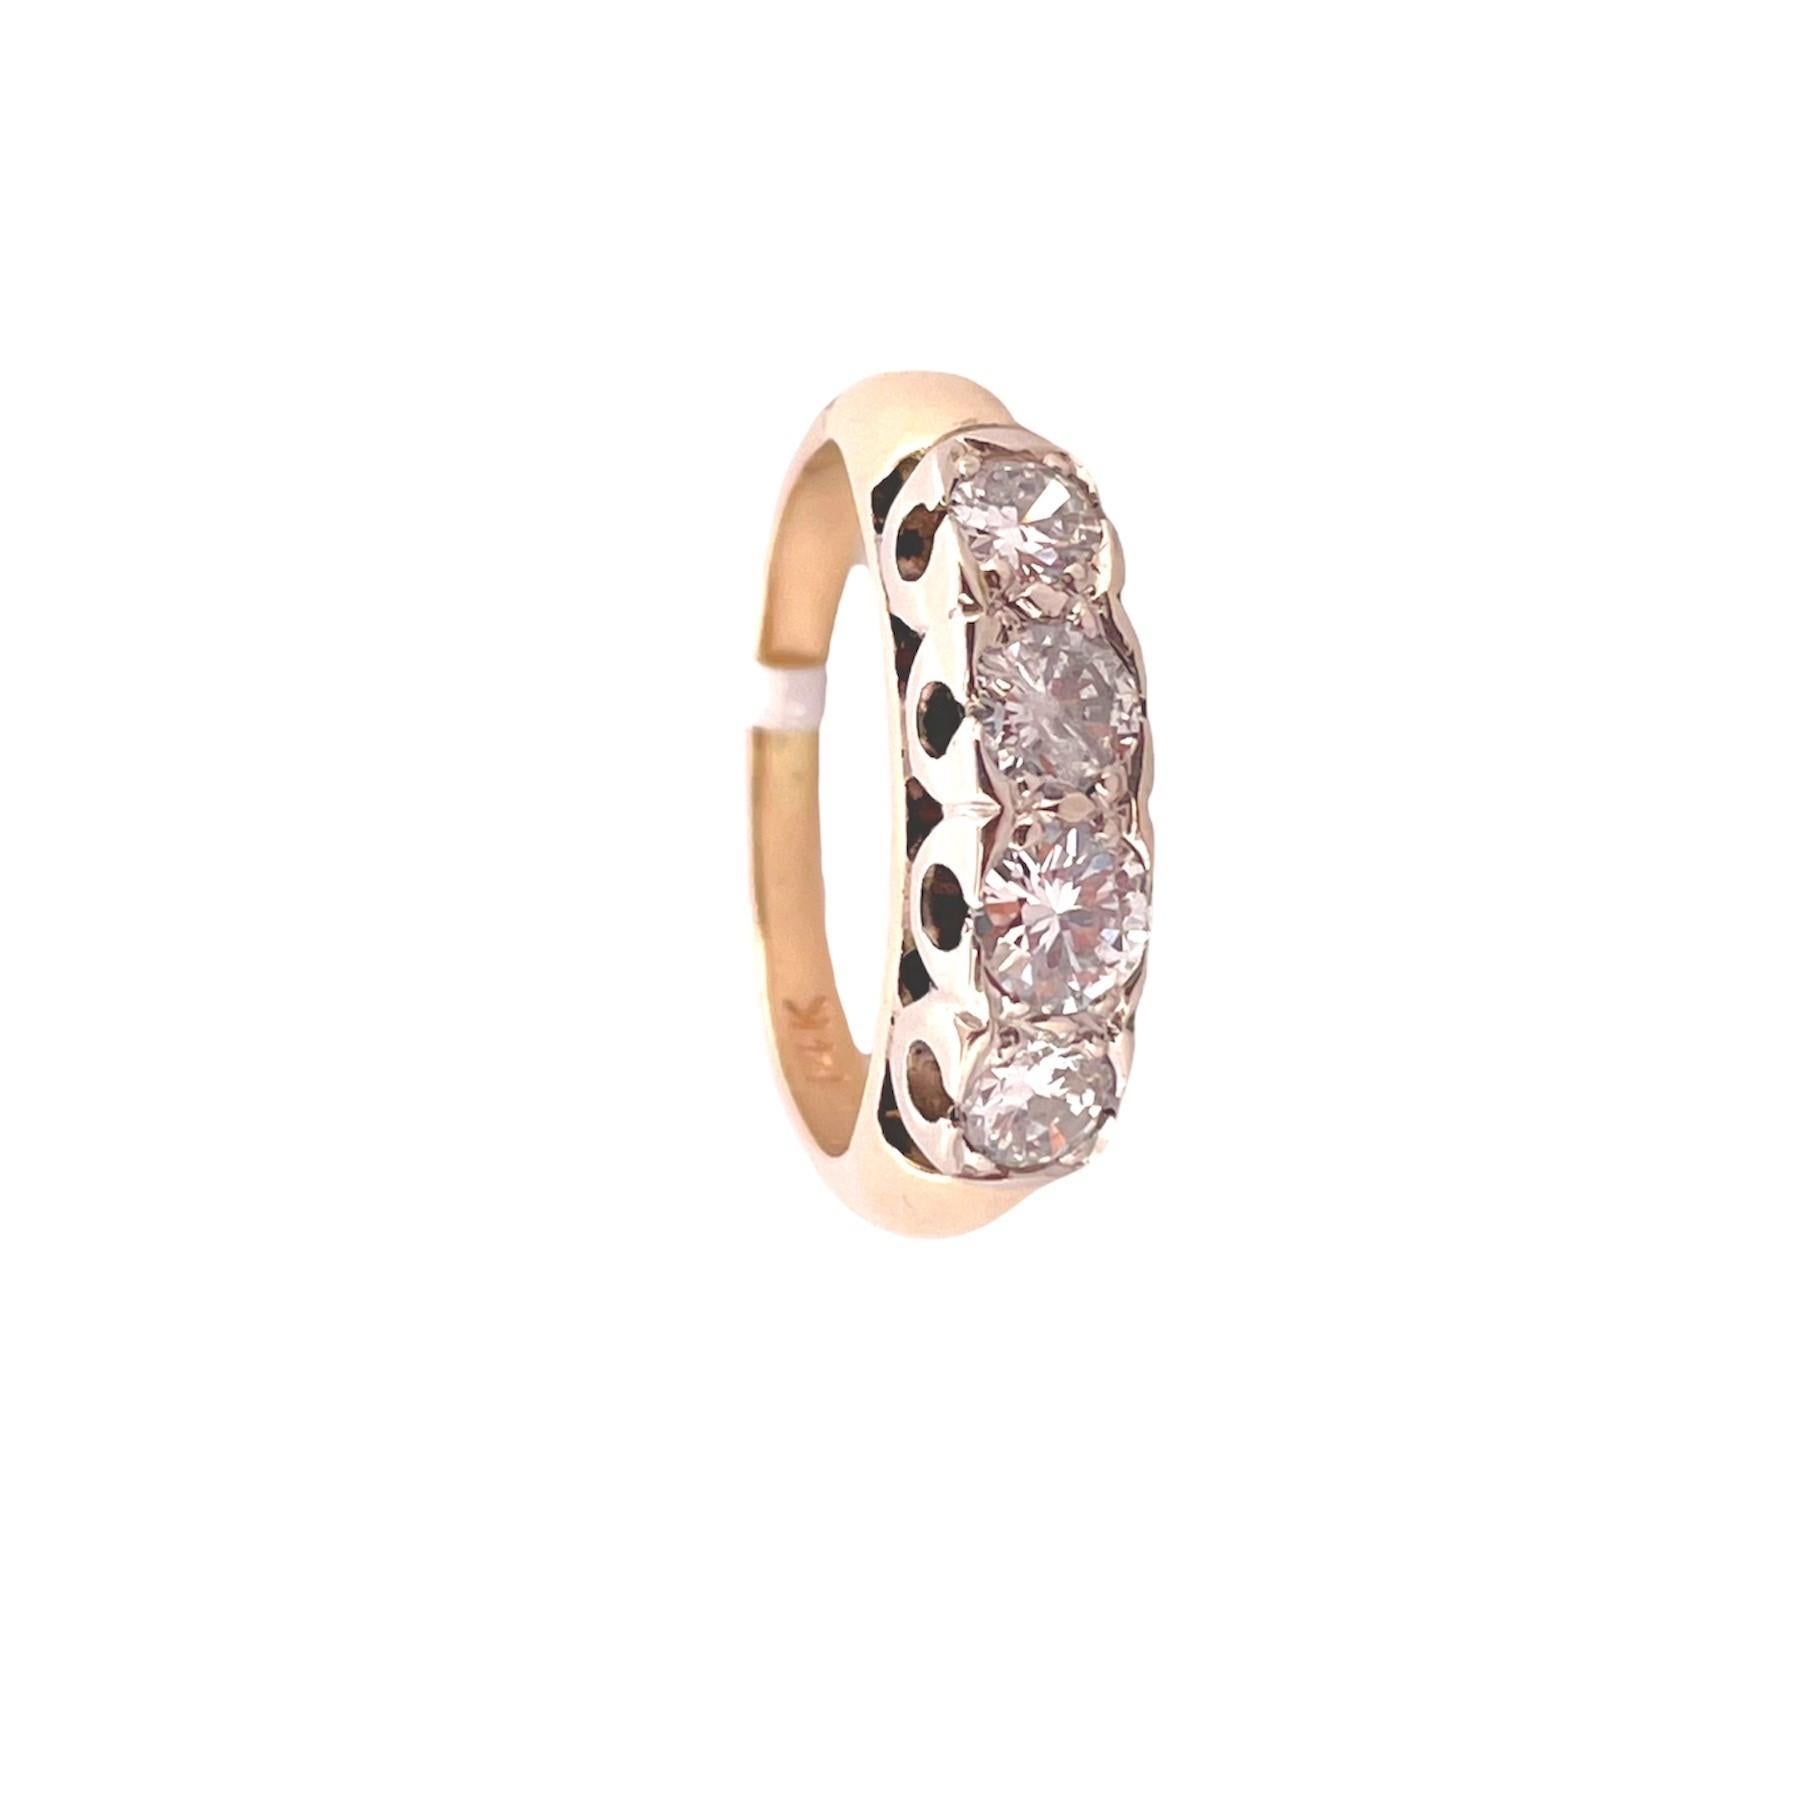 Elevate your jewelry collection with this Classic four-Stone Diamond ring. Showcasing a total carat weight (TCW) of 1.00 in I/J color diamonds with SI clarity.
Crafted in lustrous 14K yellow gold and weighing 3.06 grams, this band exudes timeless